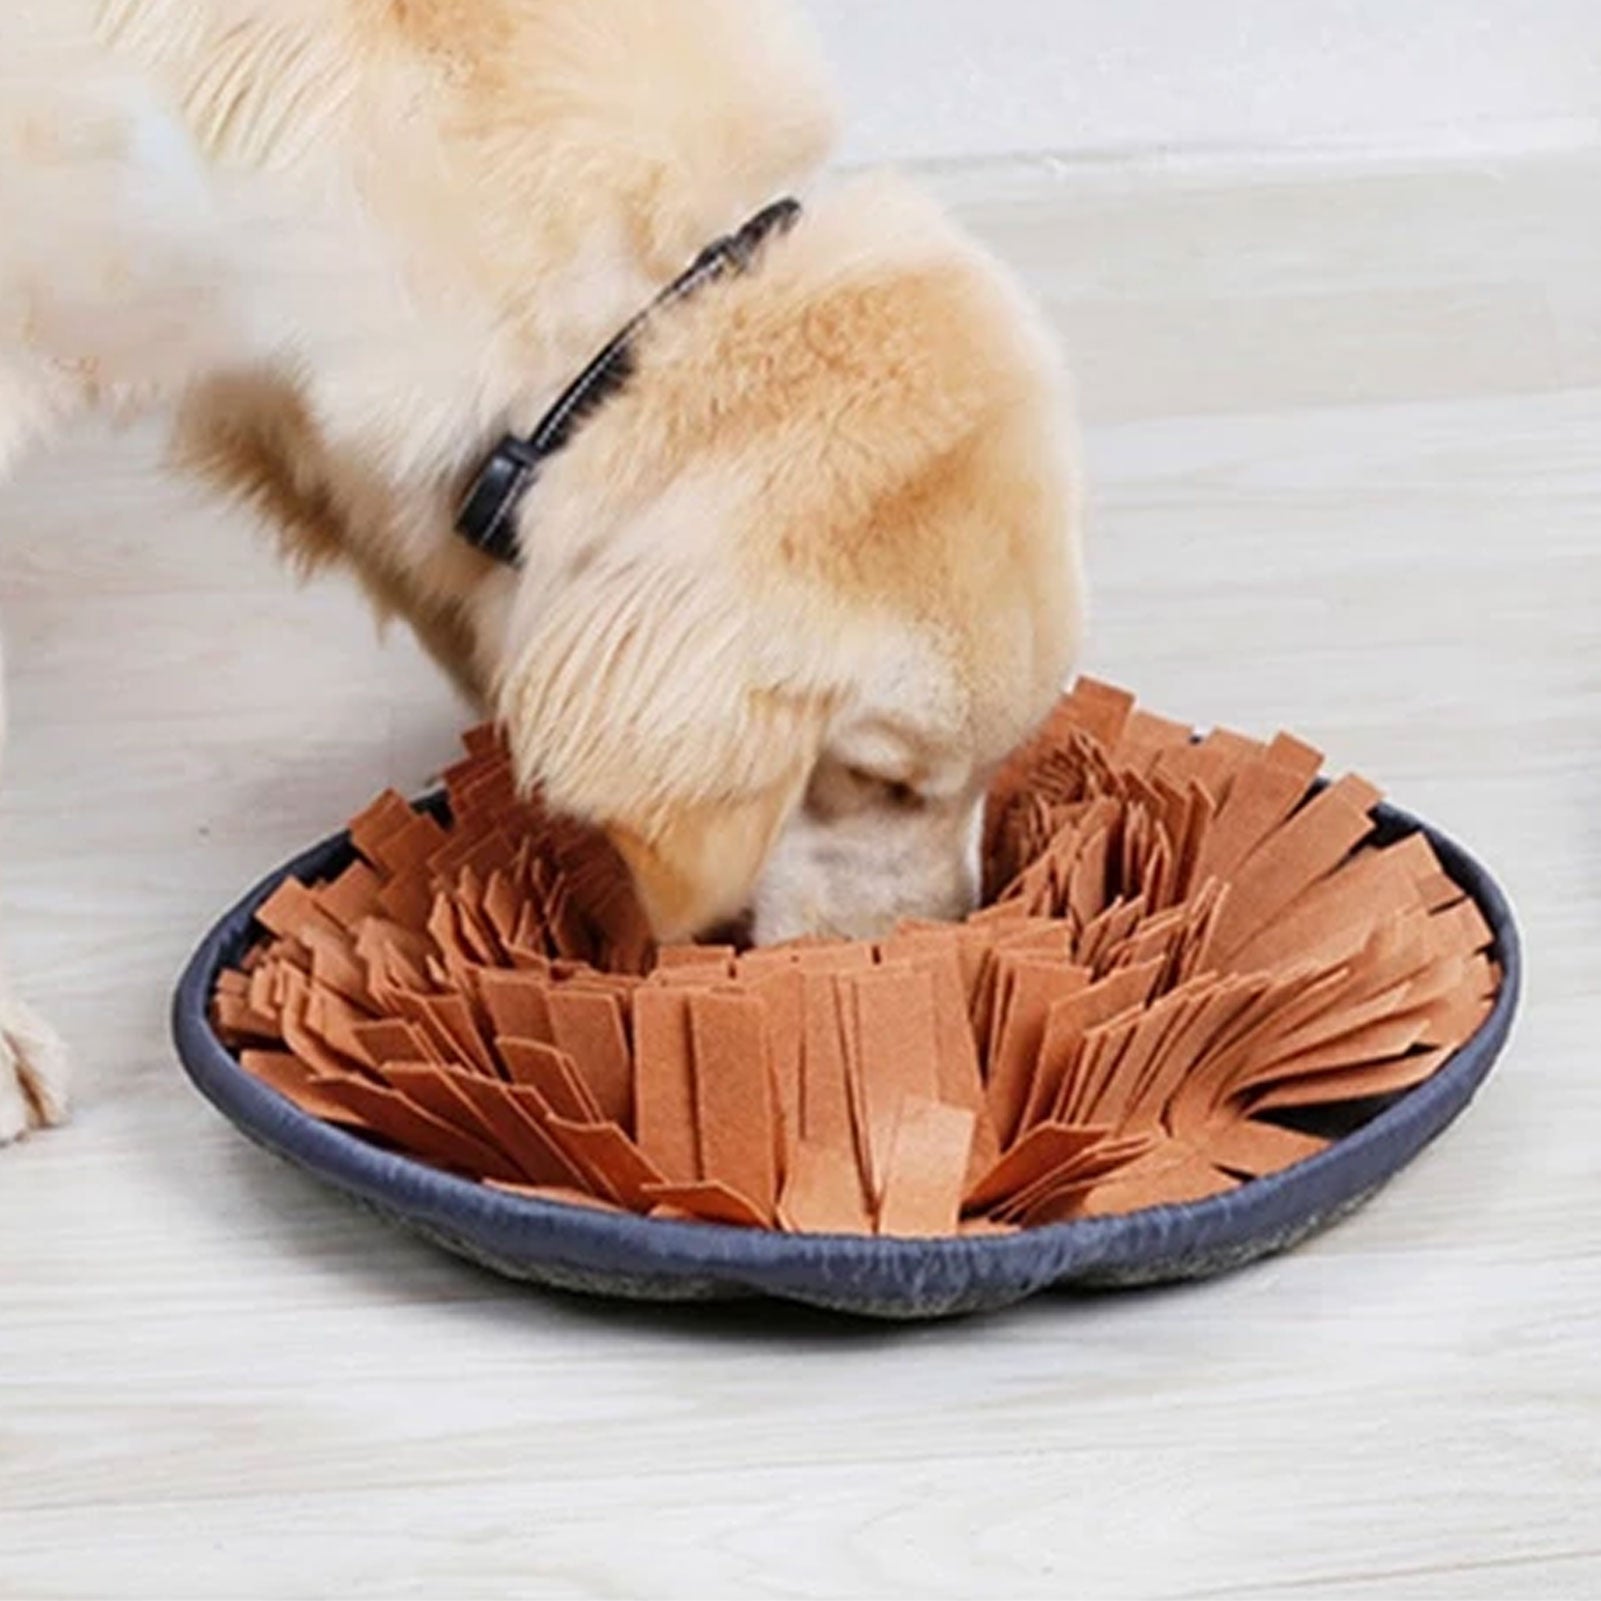 Buy PET ARENA Adjustable Snuffle mat for Dogs, Cats - Dog Puzzle Toys,  Enrichment Pet Foraging mat for Smell Training and Slow Eating, Stress  Relief Dog Toy for Feeding, Dog Mental Stimulation